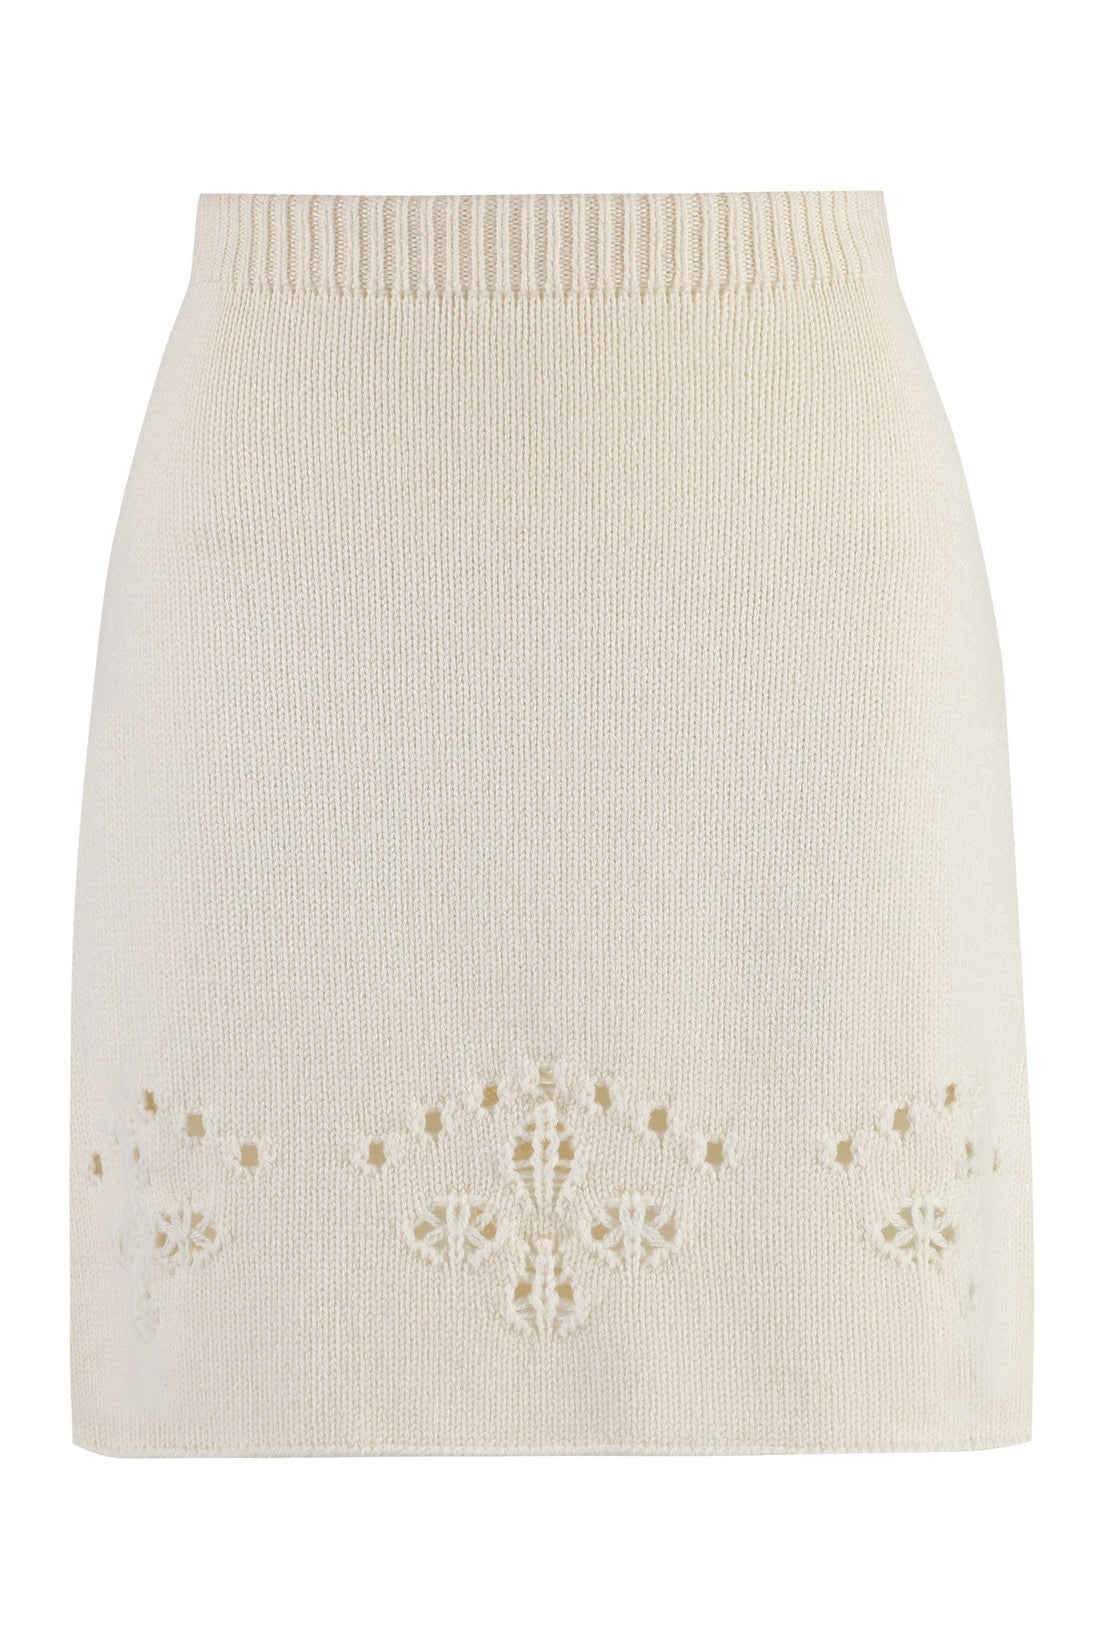 Chloé-OUTLET-SALE-Knitted mini skirt-ARCHIVIST